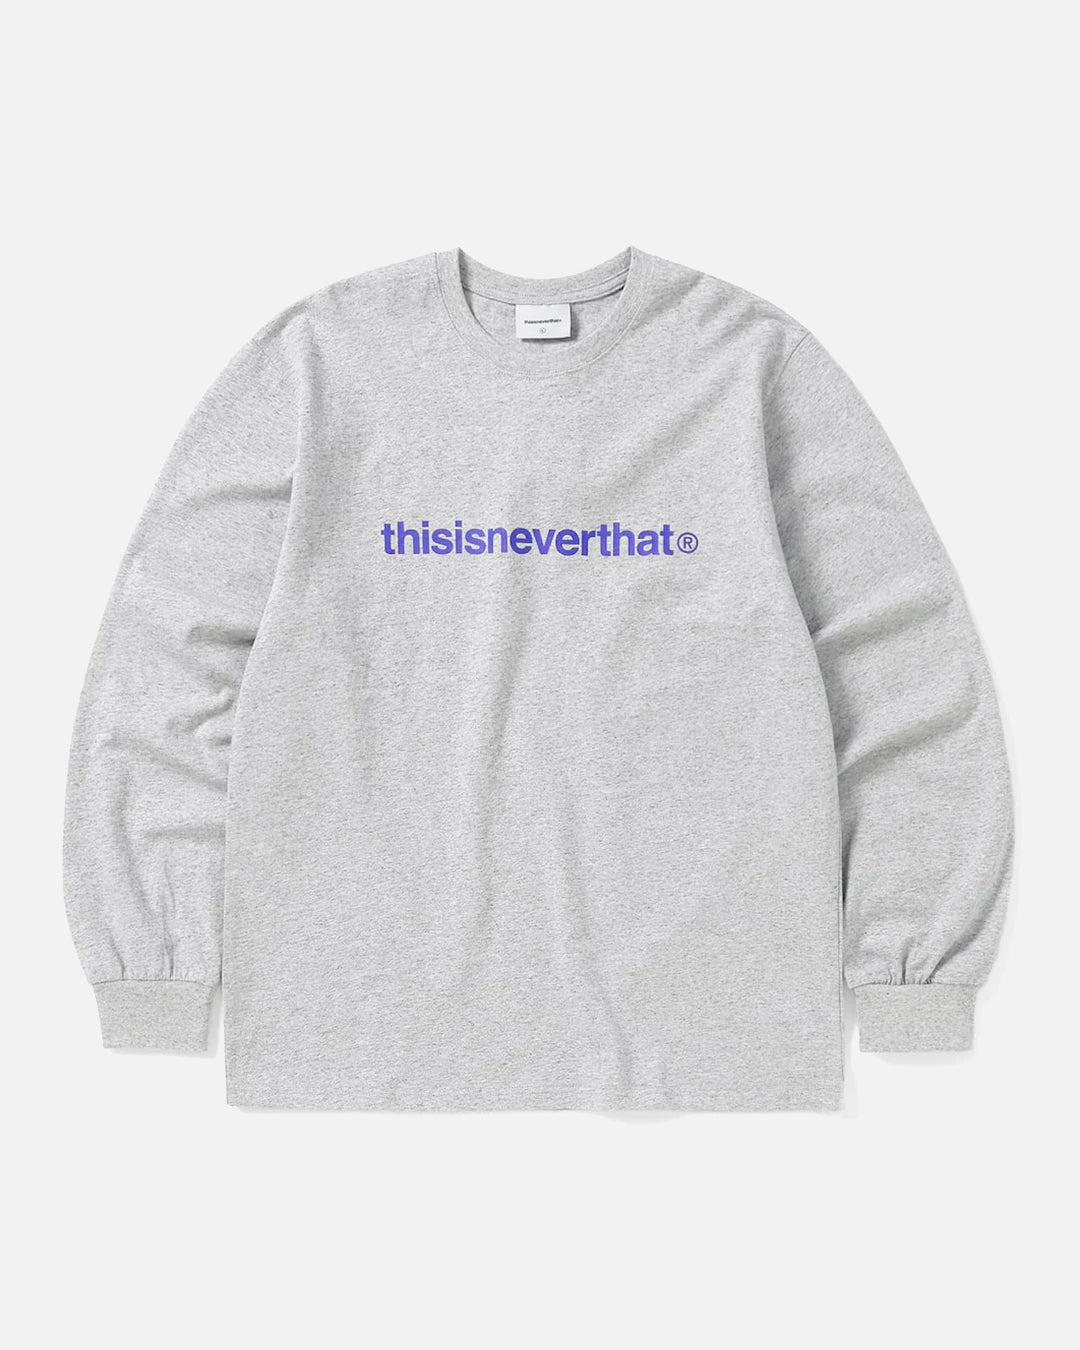 thisisneverthat T-Logo L/S | Blues Tee Grey Heather Store in